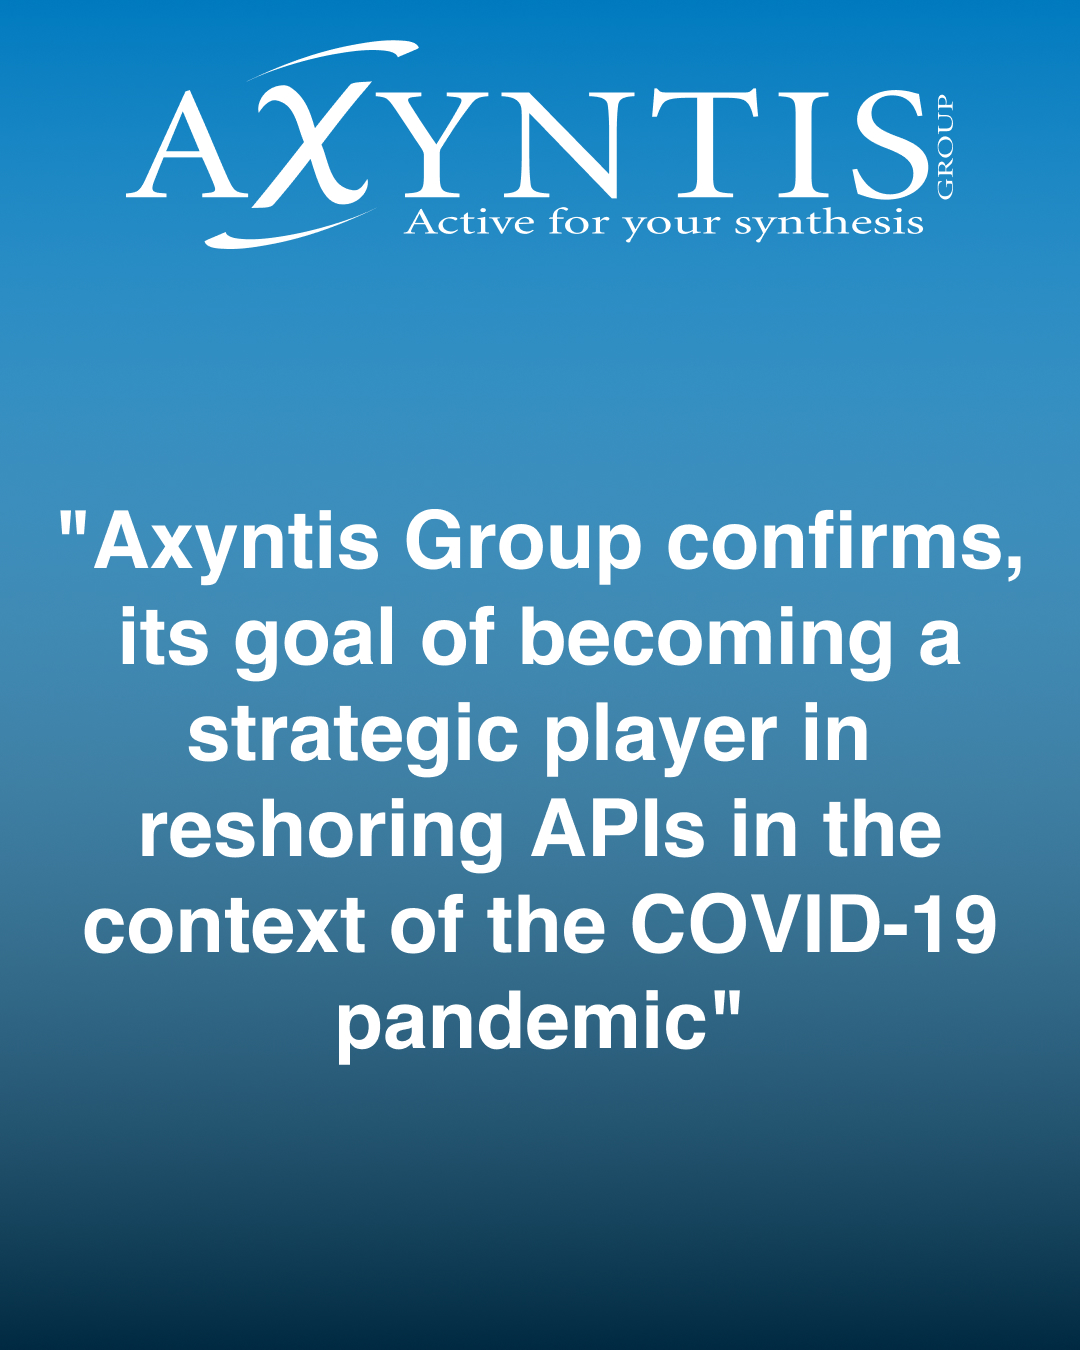 "Axyntis Group confirms, its goal of becoming a strategic player in reshoring APIs in the context of the COVID-19 pandemic"